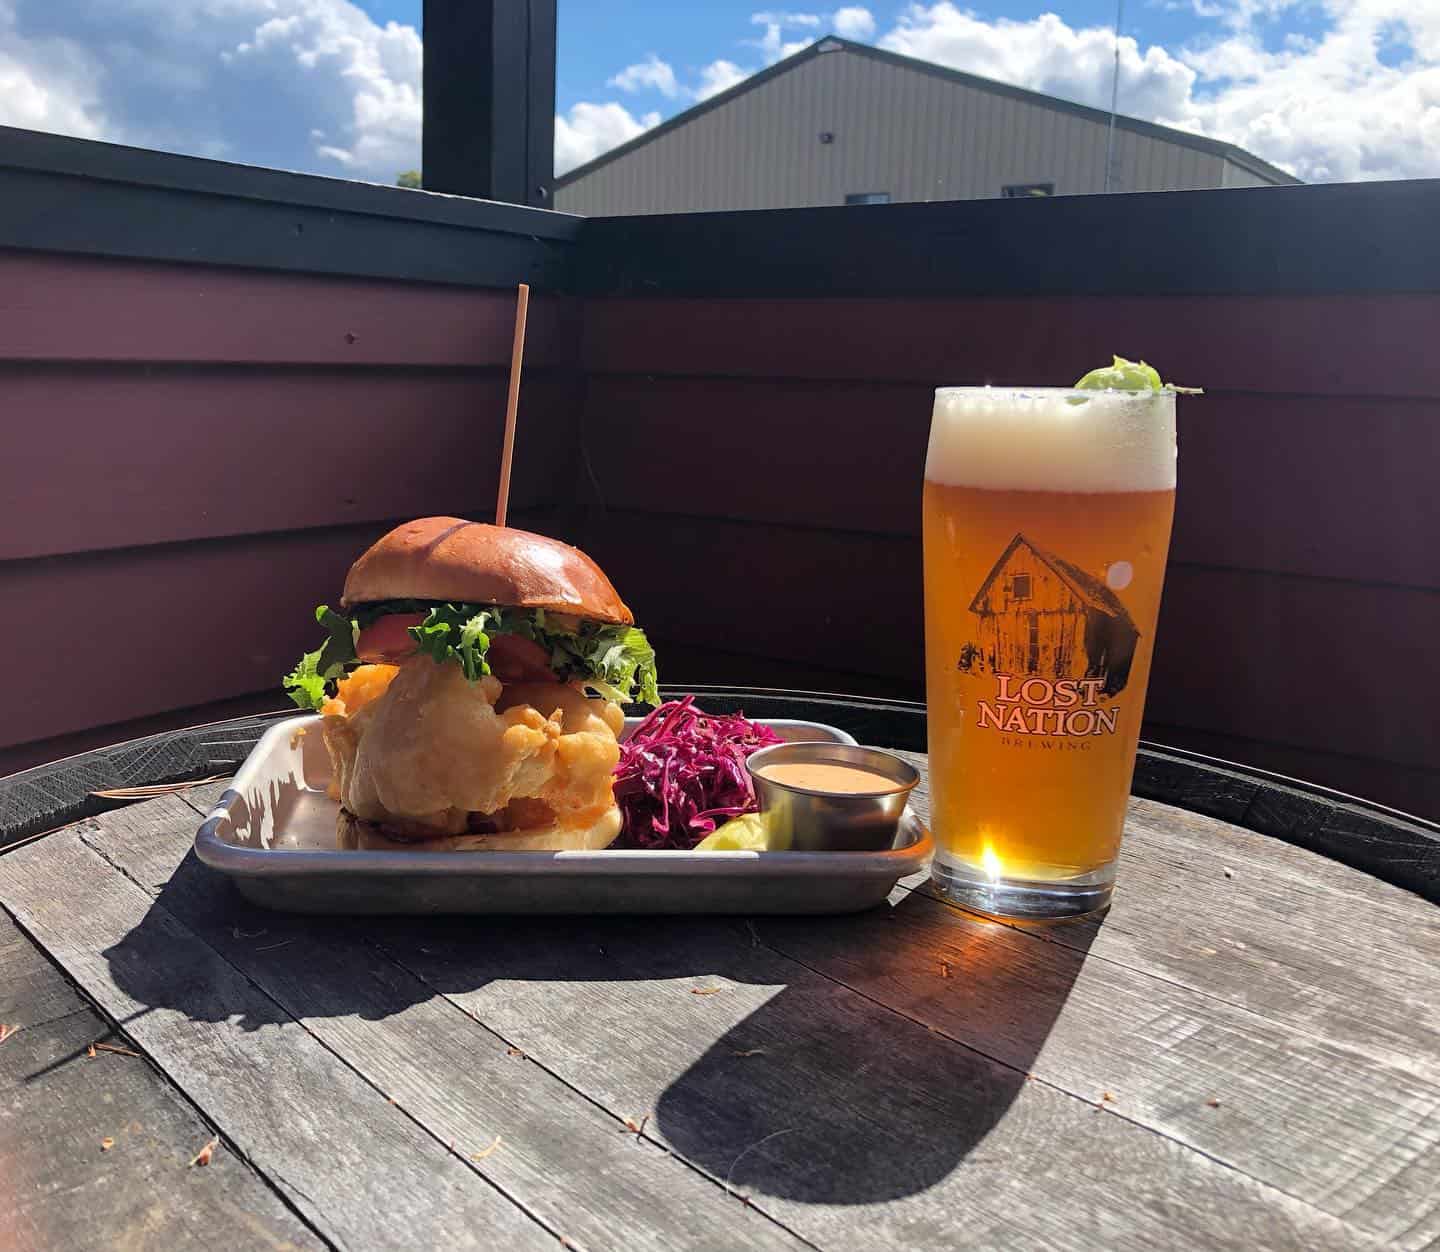 Lost Nation Brewing - Fried Haddock Sandwich and Beer